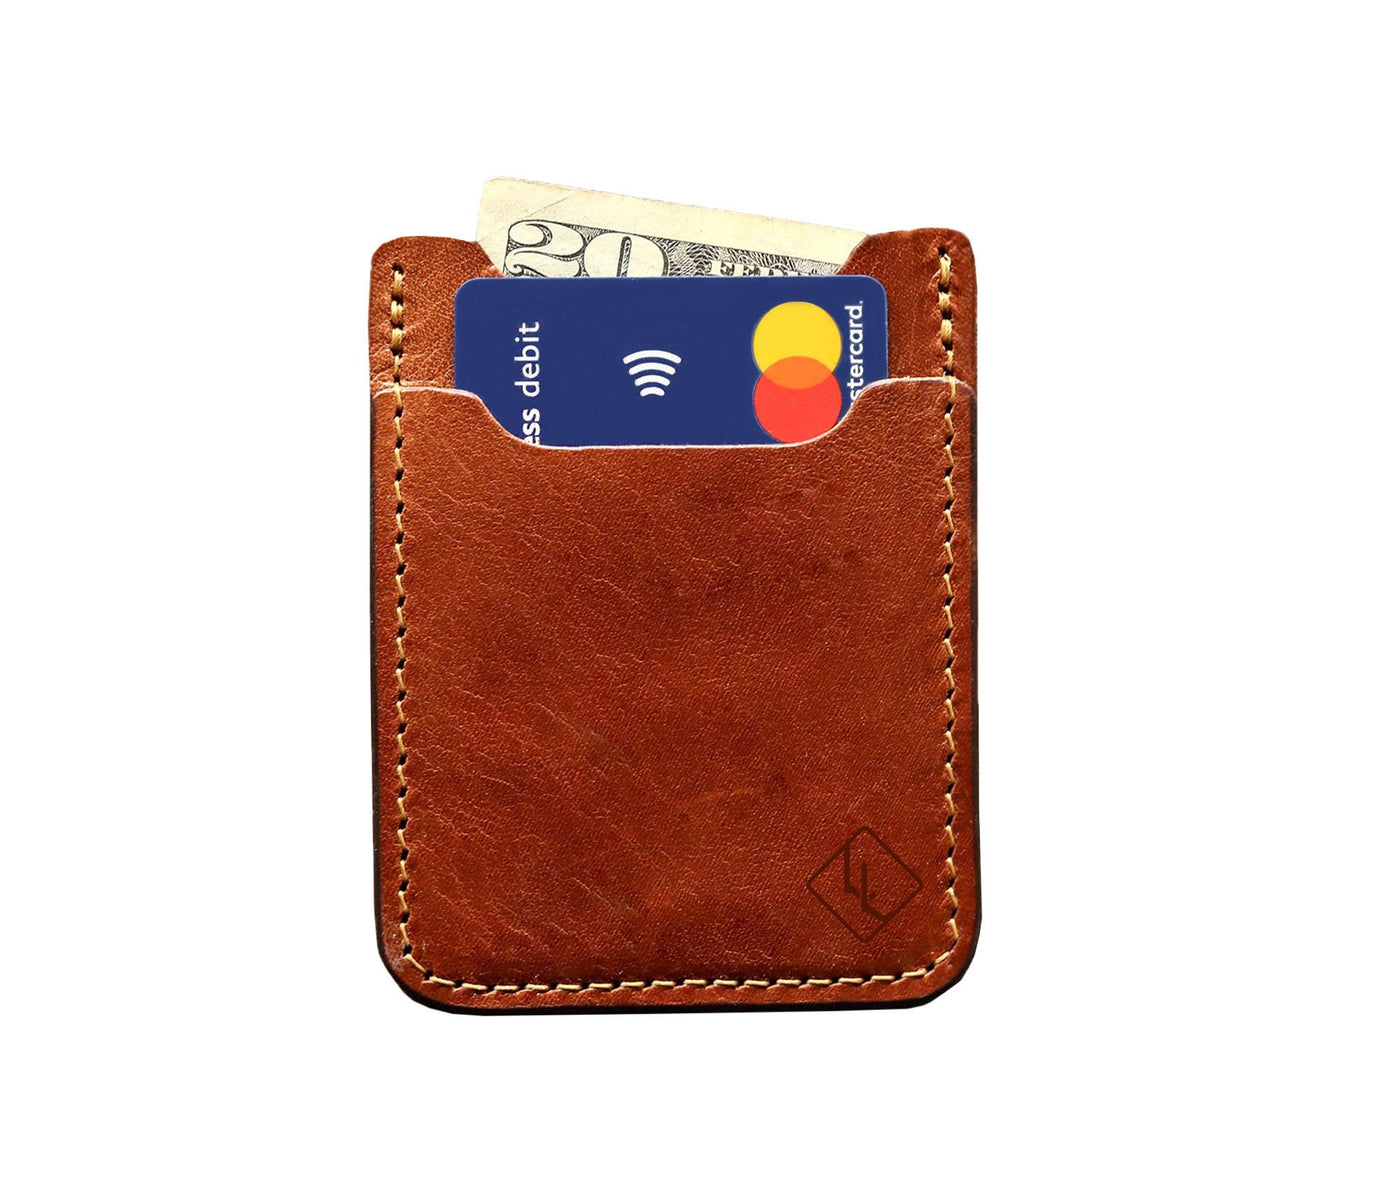 Minimalist Wallet 2.0 by Lifetime Leather Co